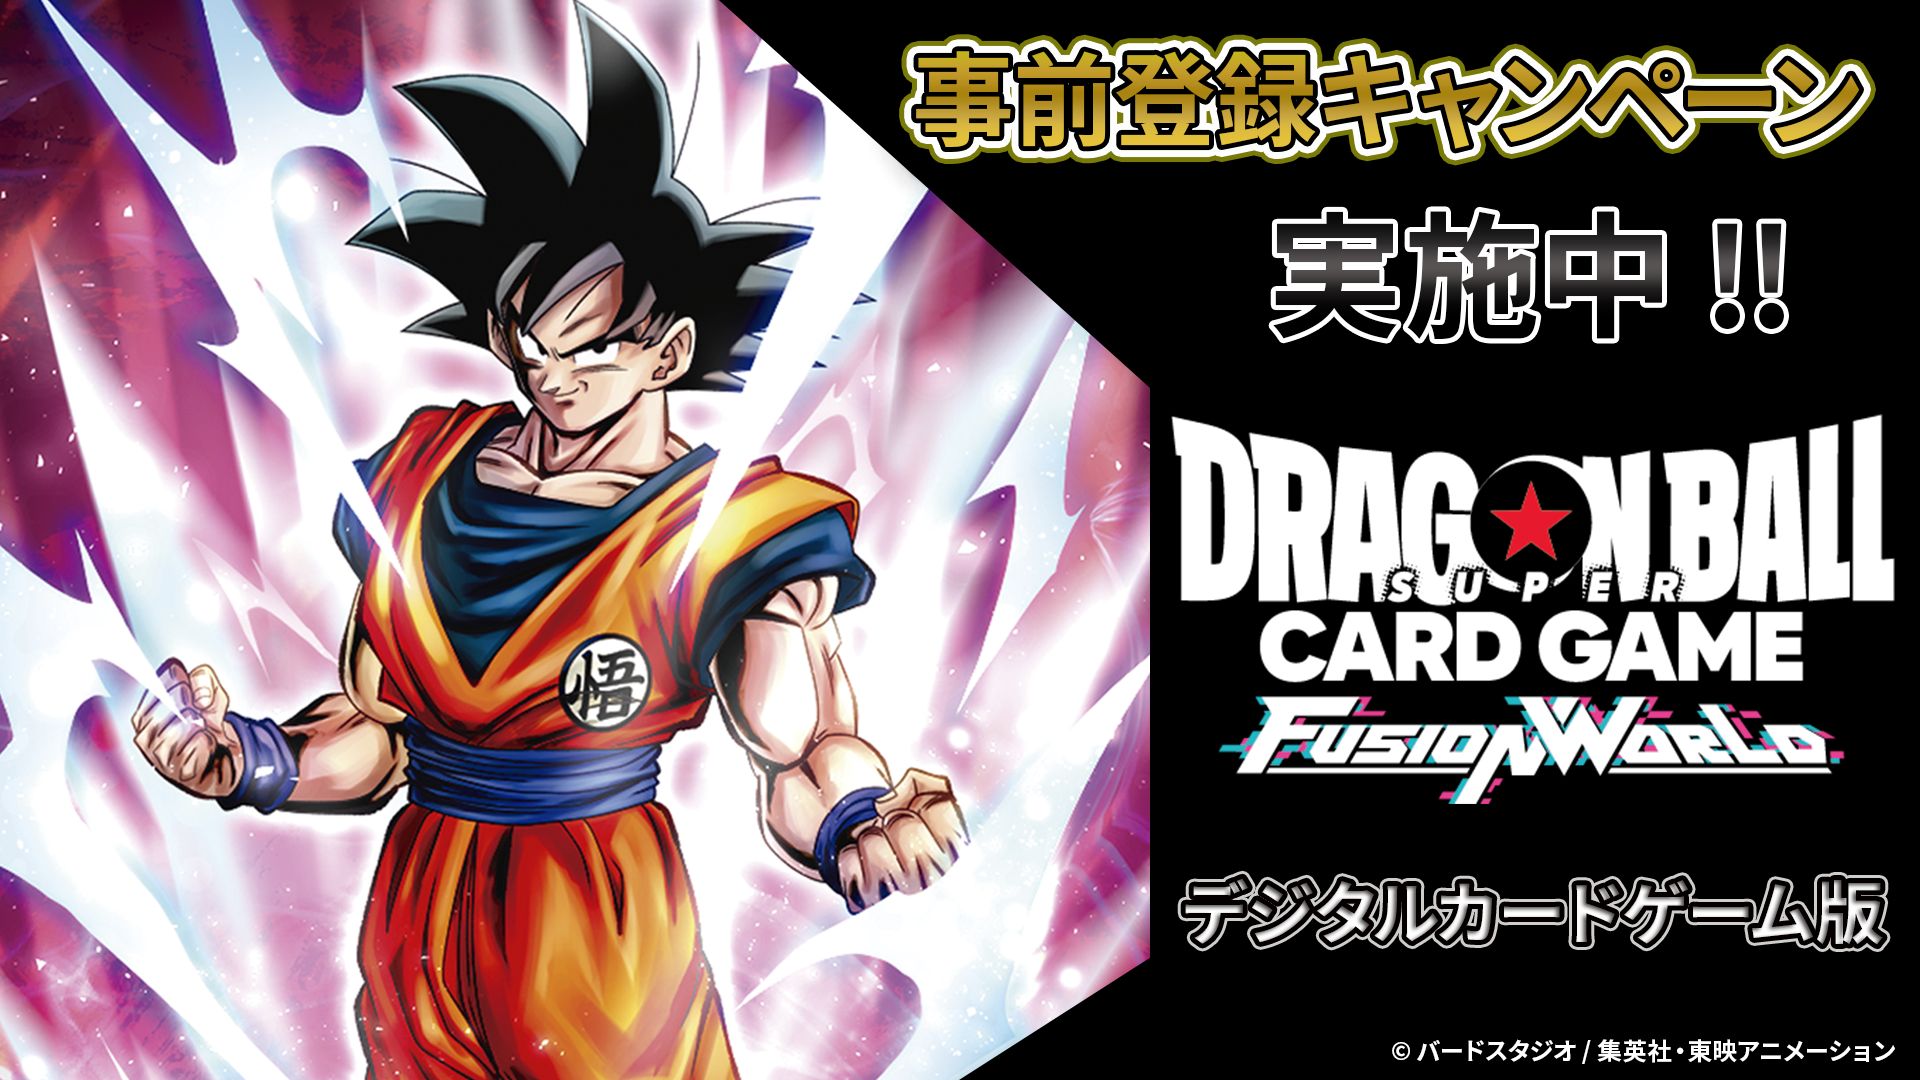 Pre-Release Campaigns Held for the Digital Version of DRAGON BALL SUPER CARD GAME Fusion World!